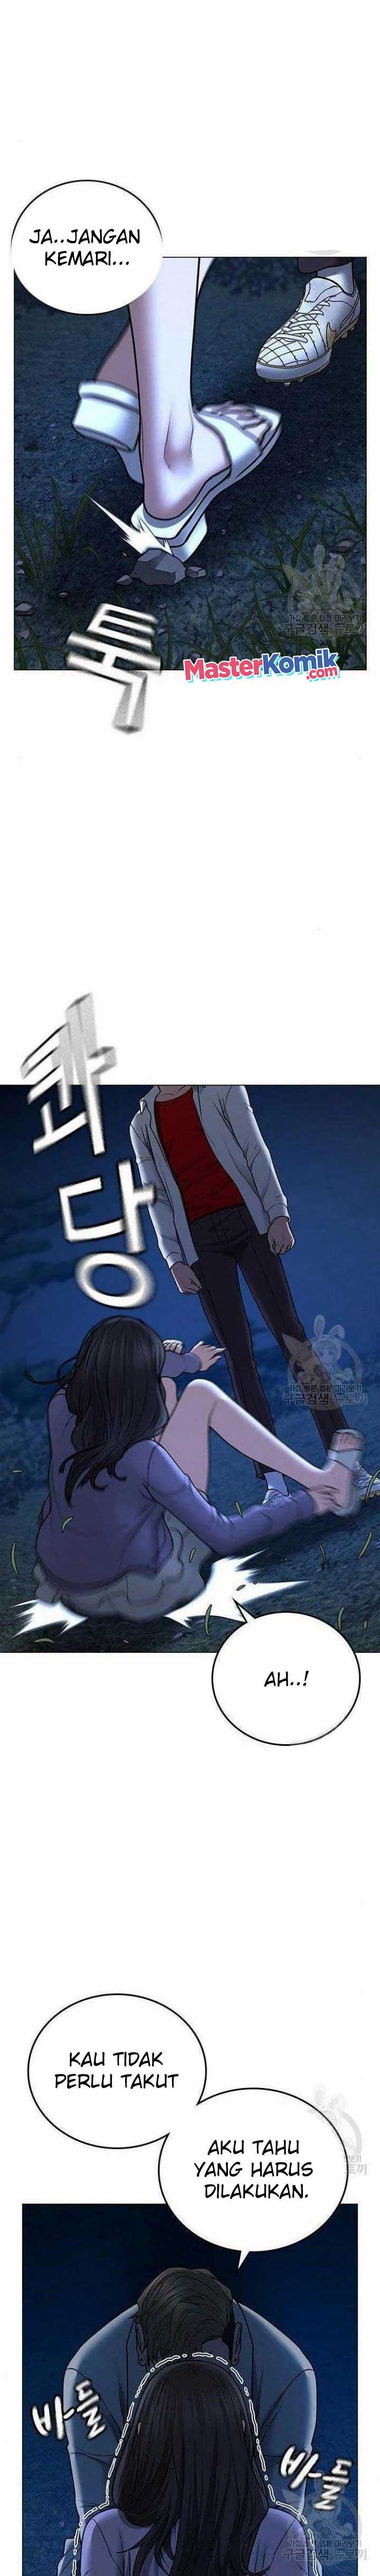 Reality Quest Chapter 43